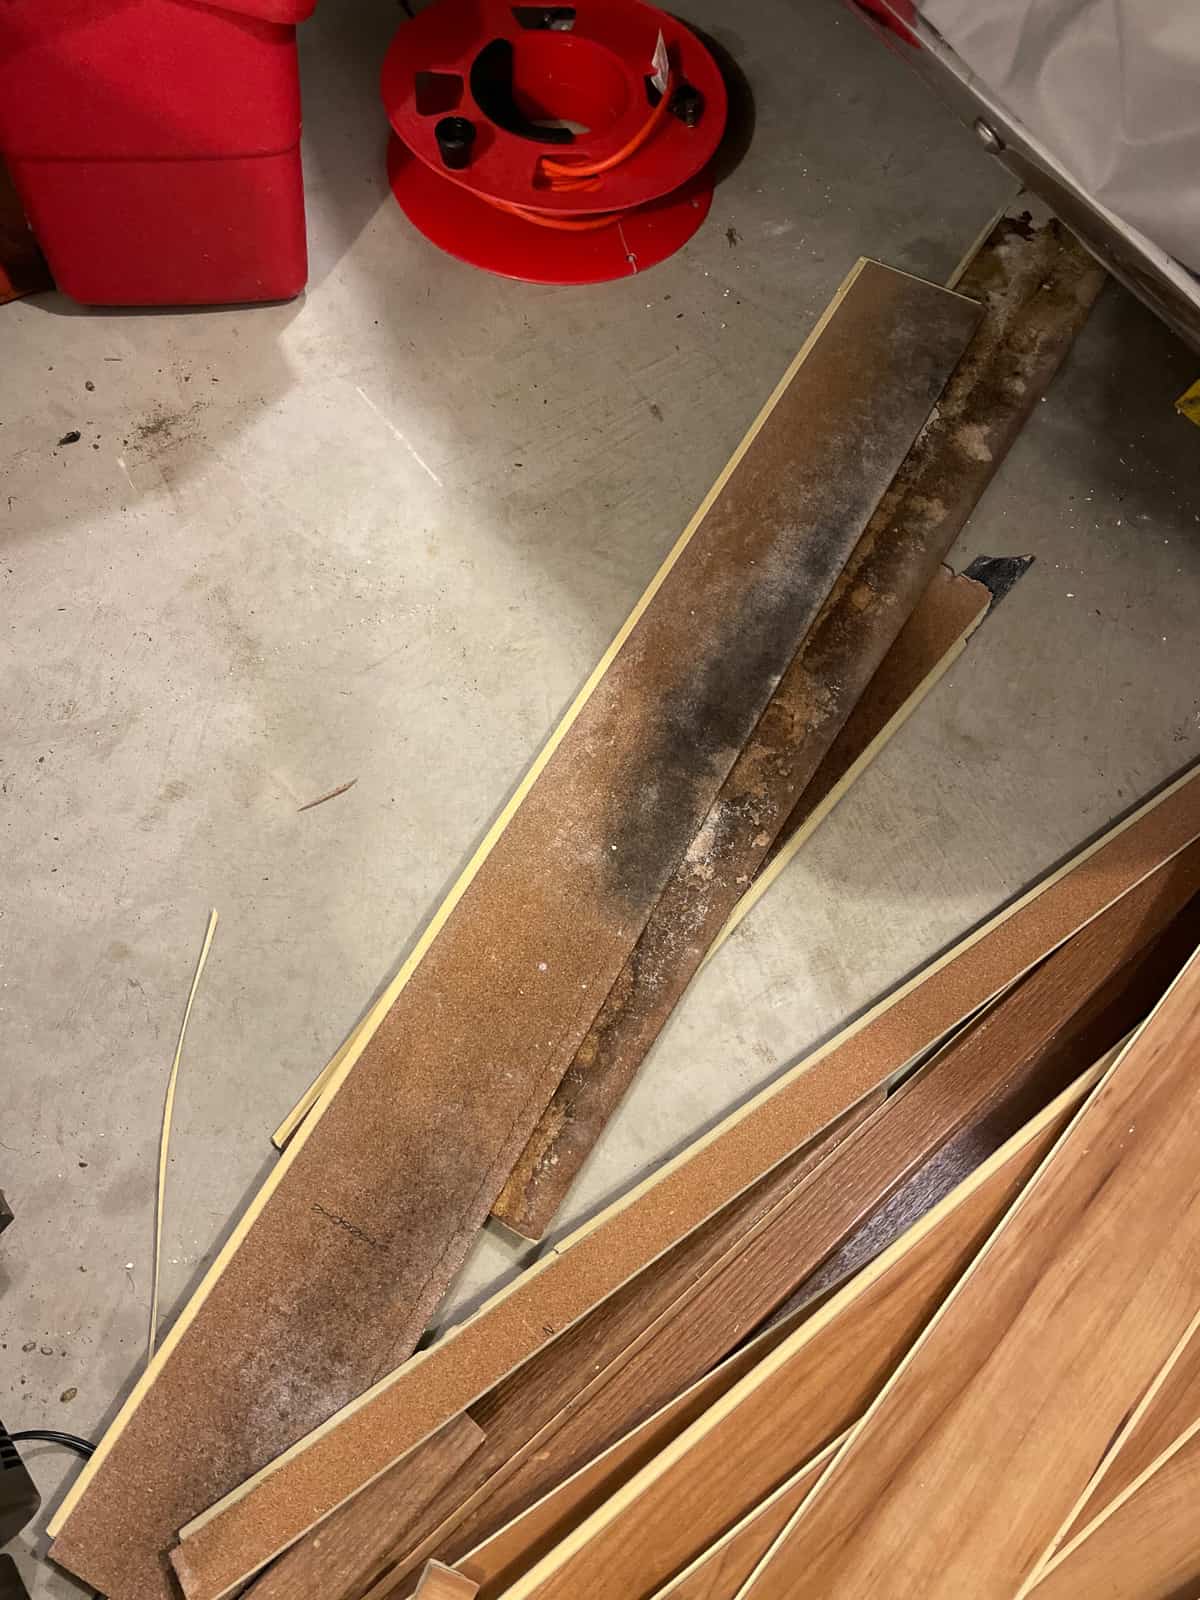 planks of wood in a garage with mold.